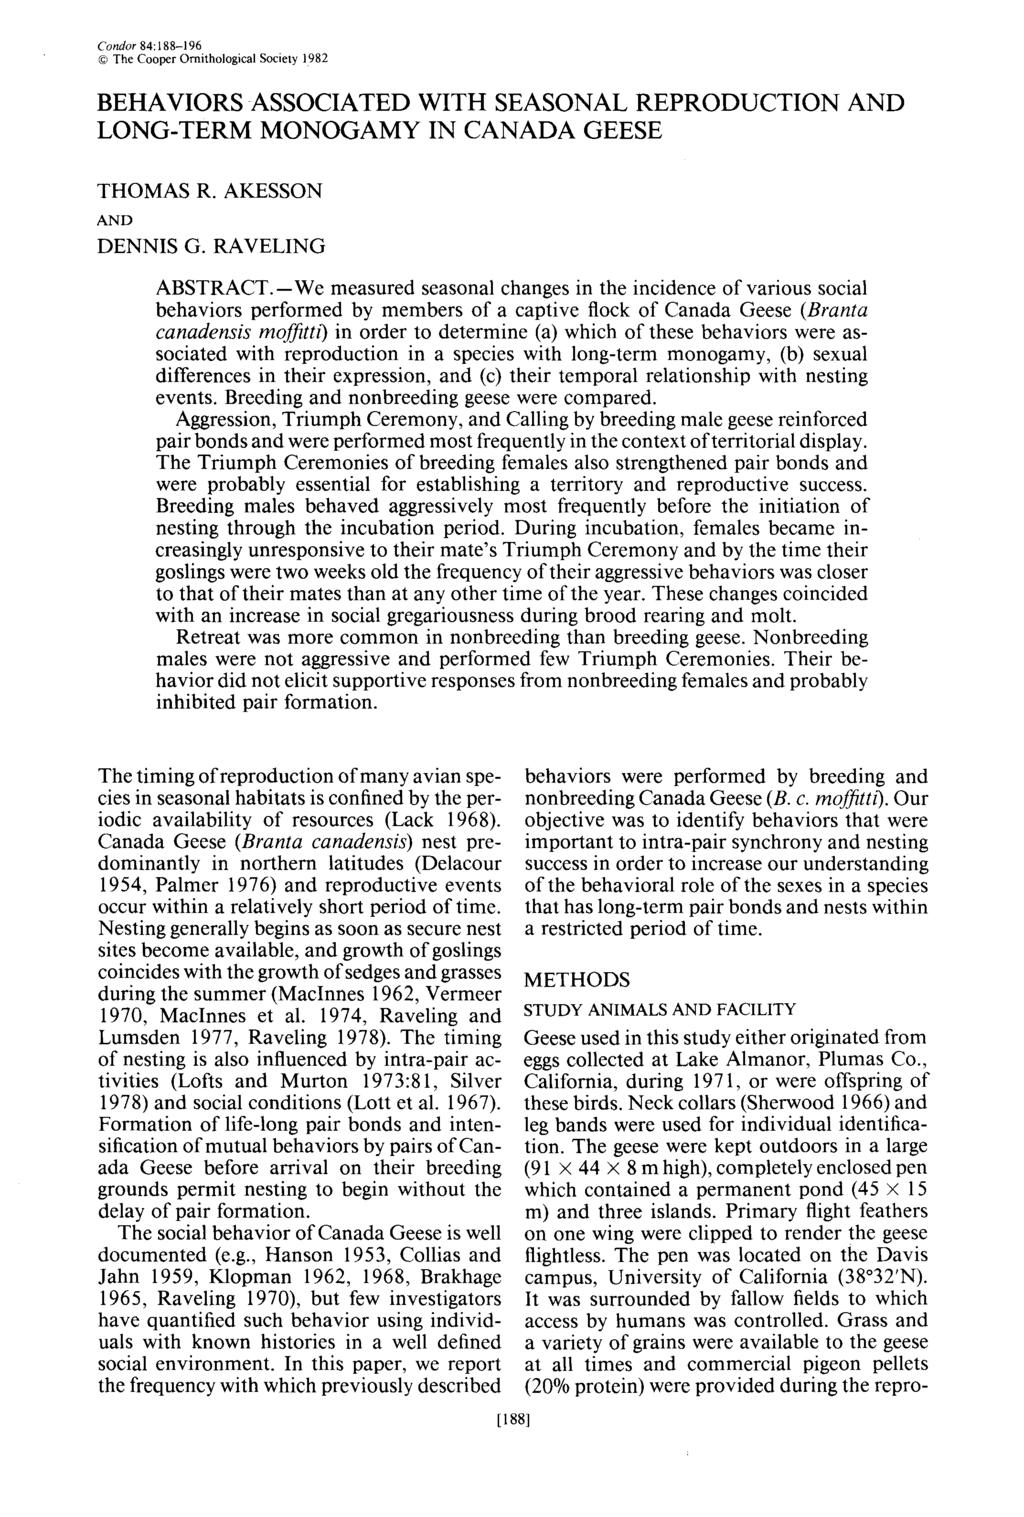 Condor 84:188-196 0 The Cooper Ornithological Society 1982 BEHAVIORS ASSOCIATED WITH SEASONAL REPRODUCTION LONG-TERM MONOGAMY IN CANADA GEESE AND THOMAS R. AKESSON AND DENNIS G. RAVELING ABSTRACT.